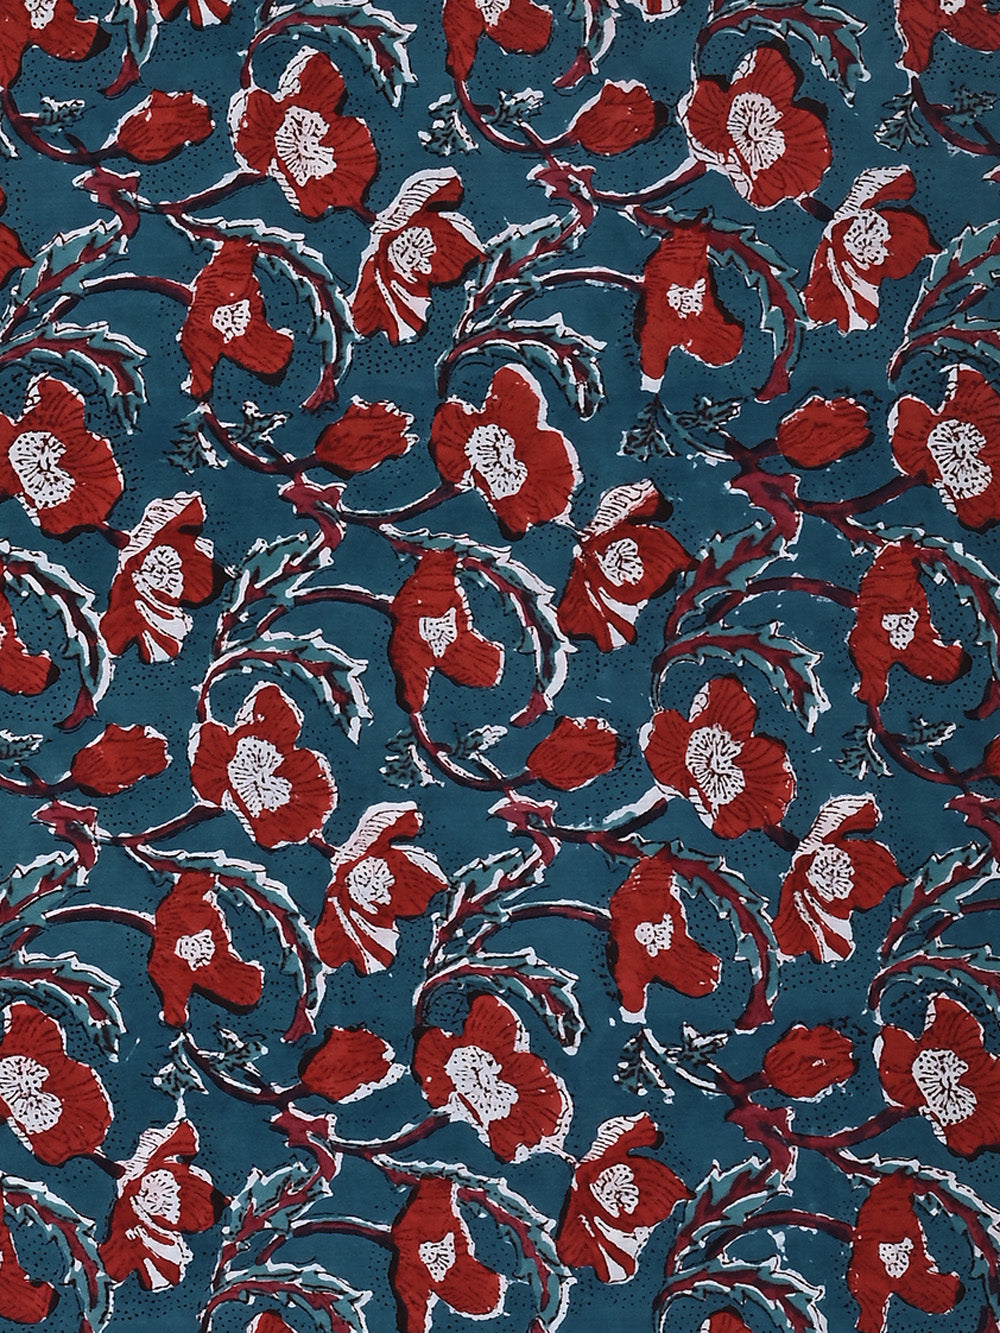 Red Poppy Jaal Pattern on Teal Blue Cotton Cambric Sanganeri Hand Block Printed Fabric